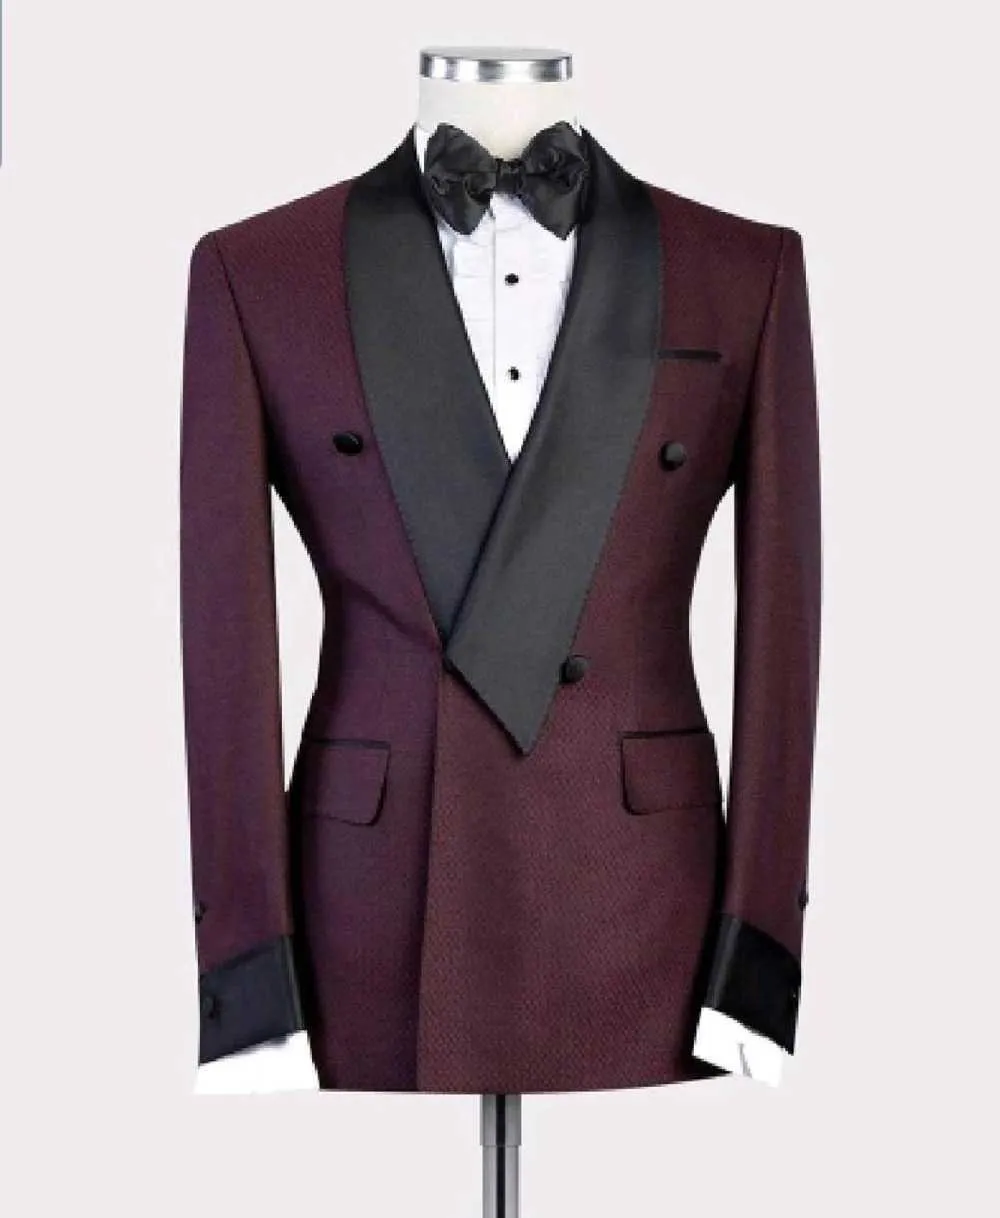 2019-New-Burgundy-Red-With-Black-Lapel-Men-s-Slim-Fit-Formal-Suits-Custom-Made-2